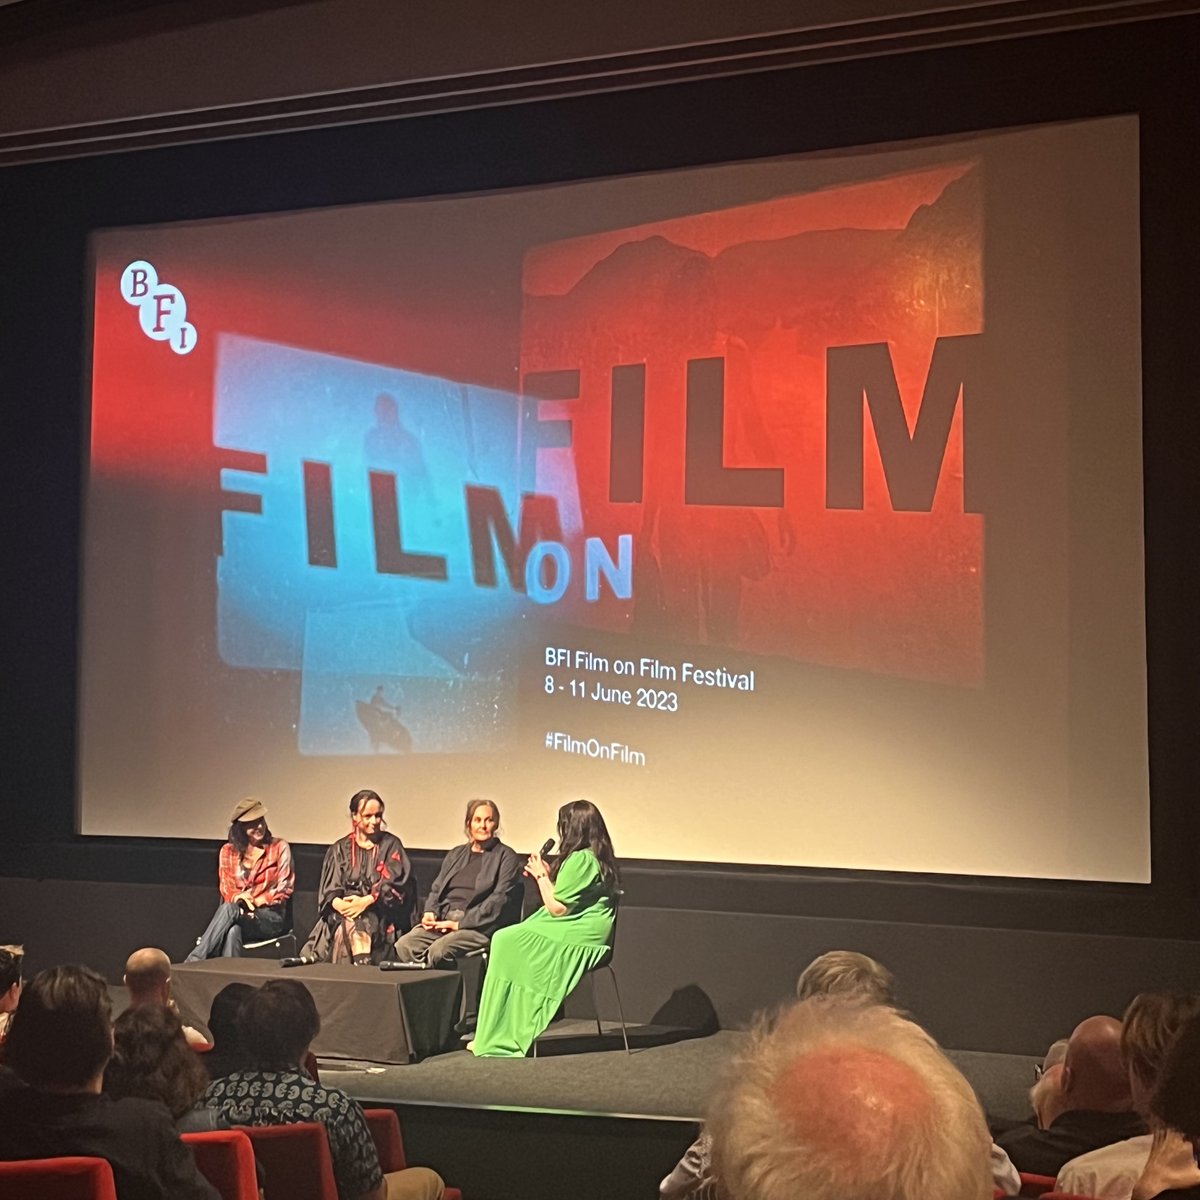 Amazing to see my favourite British director Lynne Ramsay introducing her masterpiece Morvern Callar at #FilmOnFilm festival with Samantha Morton, Robyn Slovo & @Kimlovesfilms. Thank you @BFI !